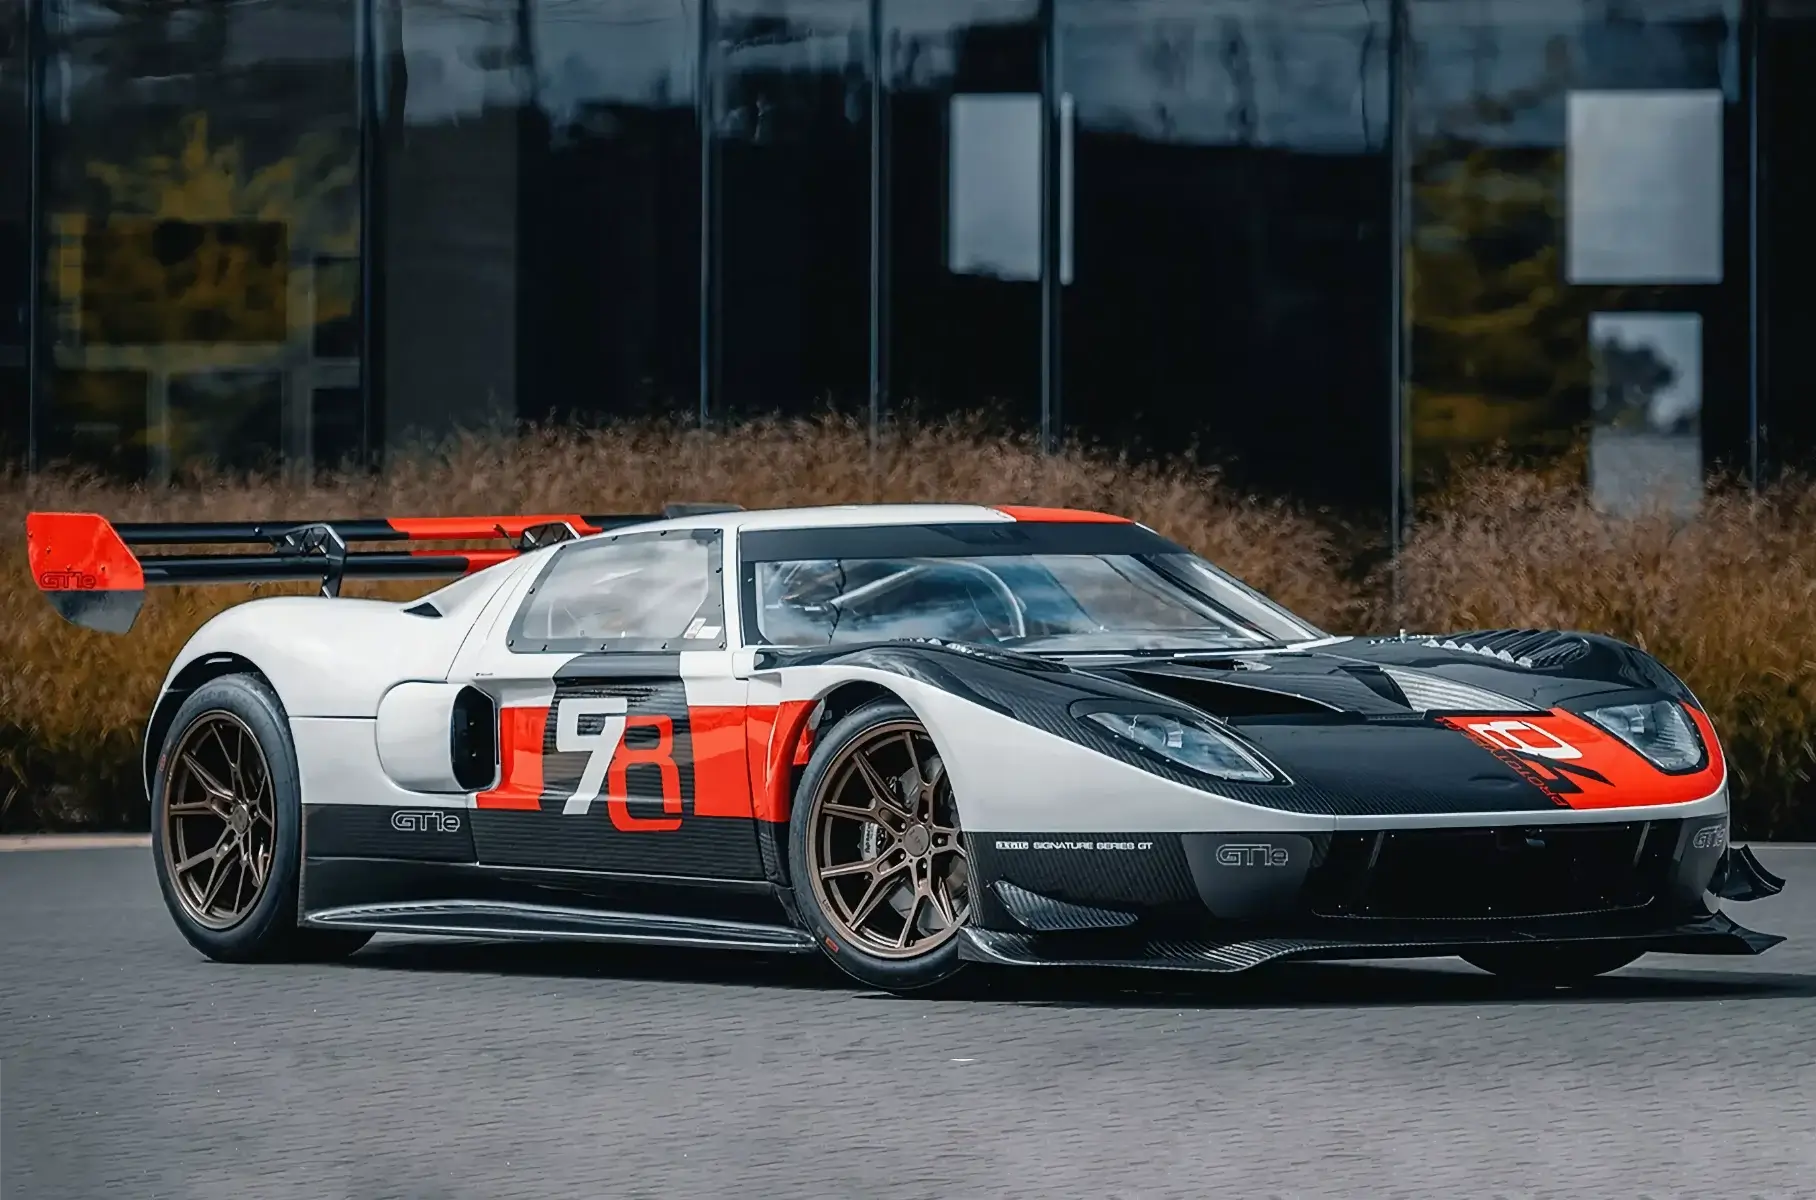 The American company will release electric versions of the Ford GT and